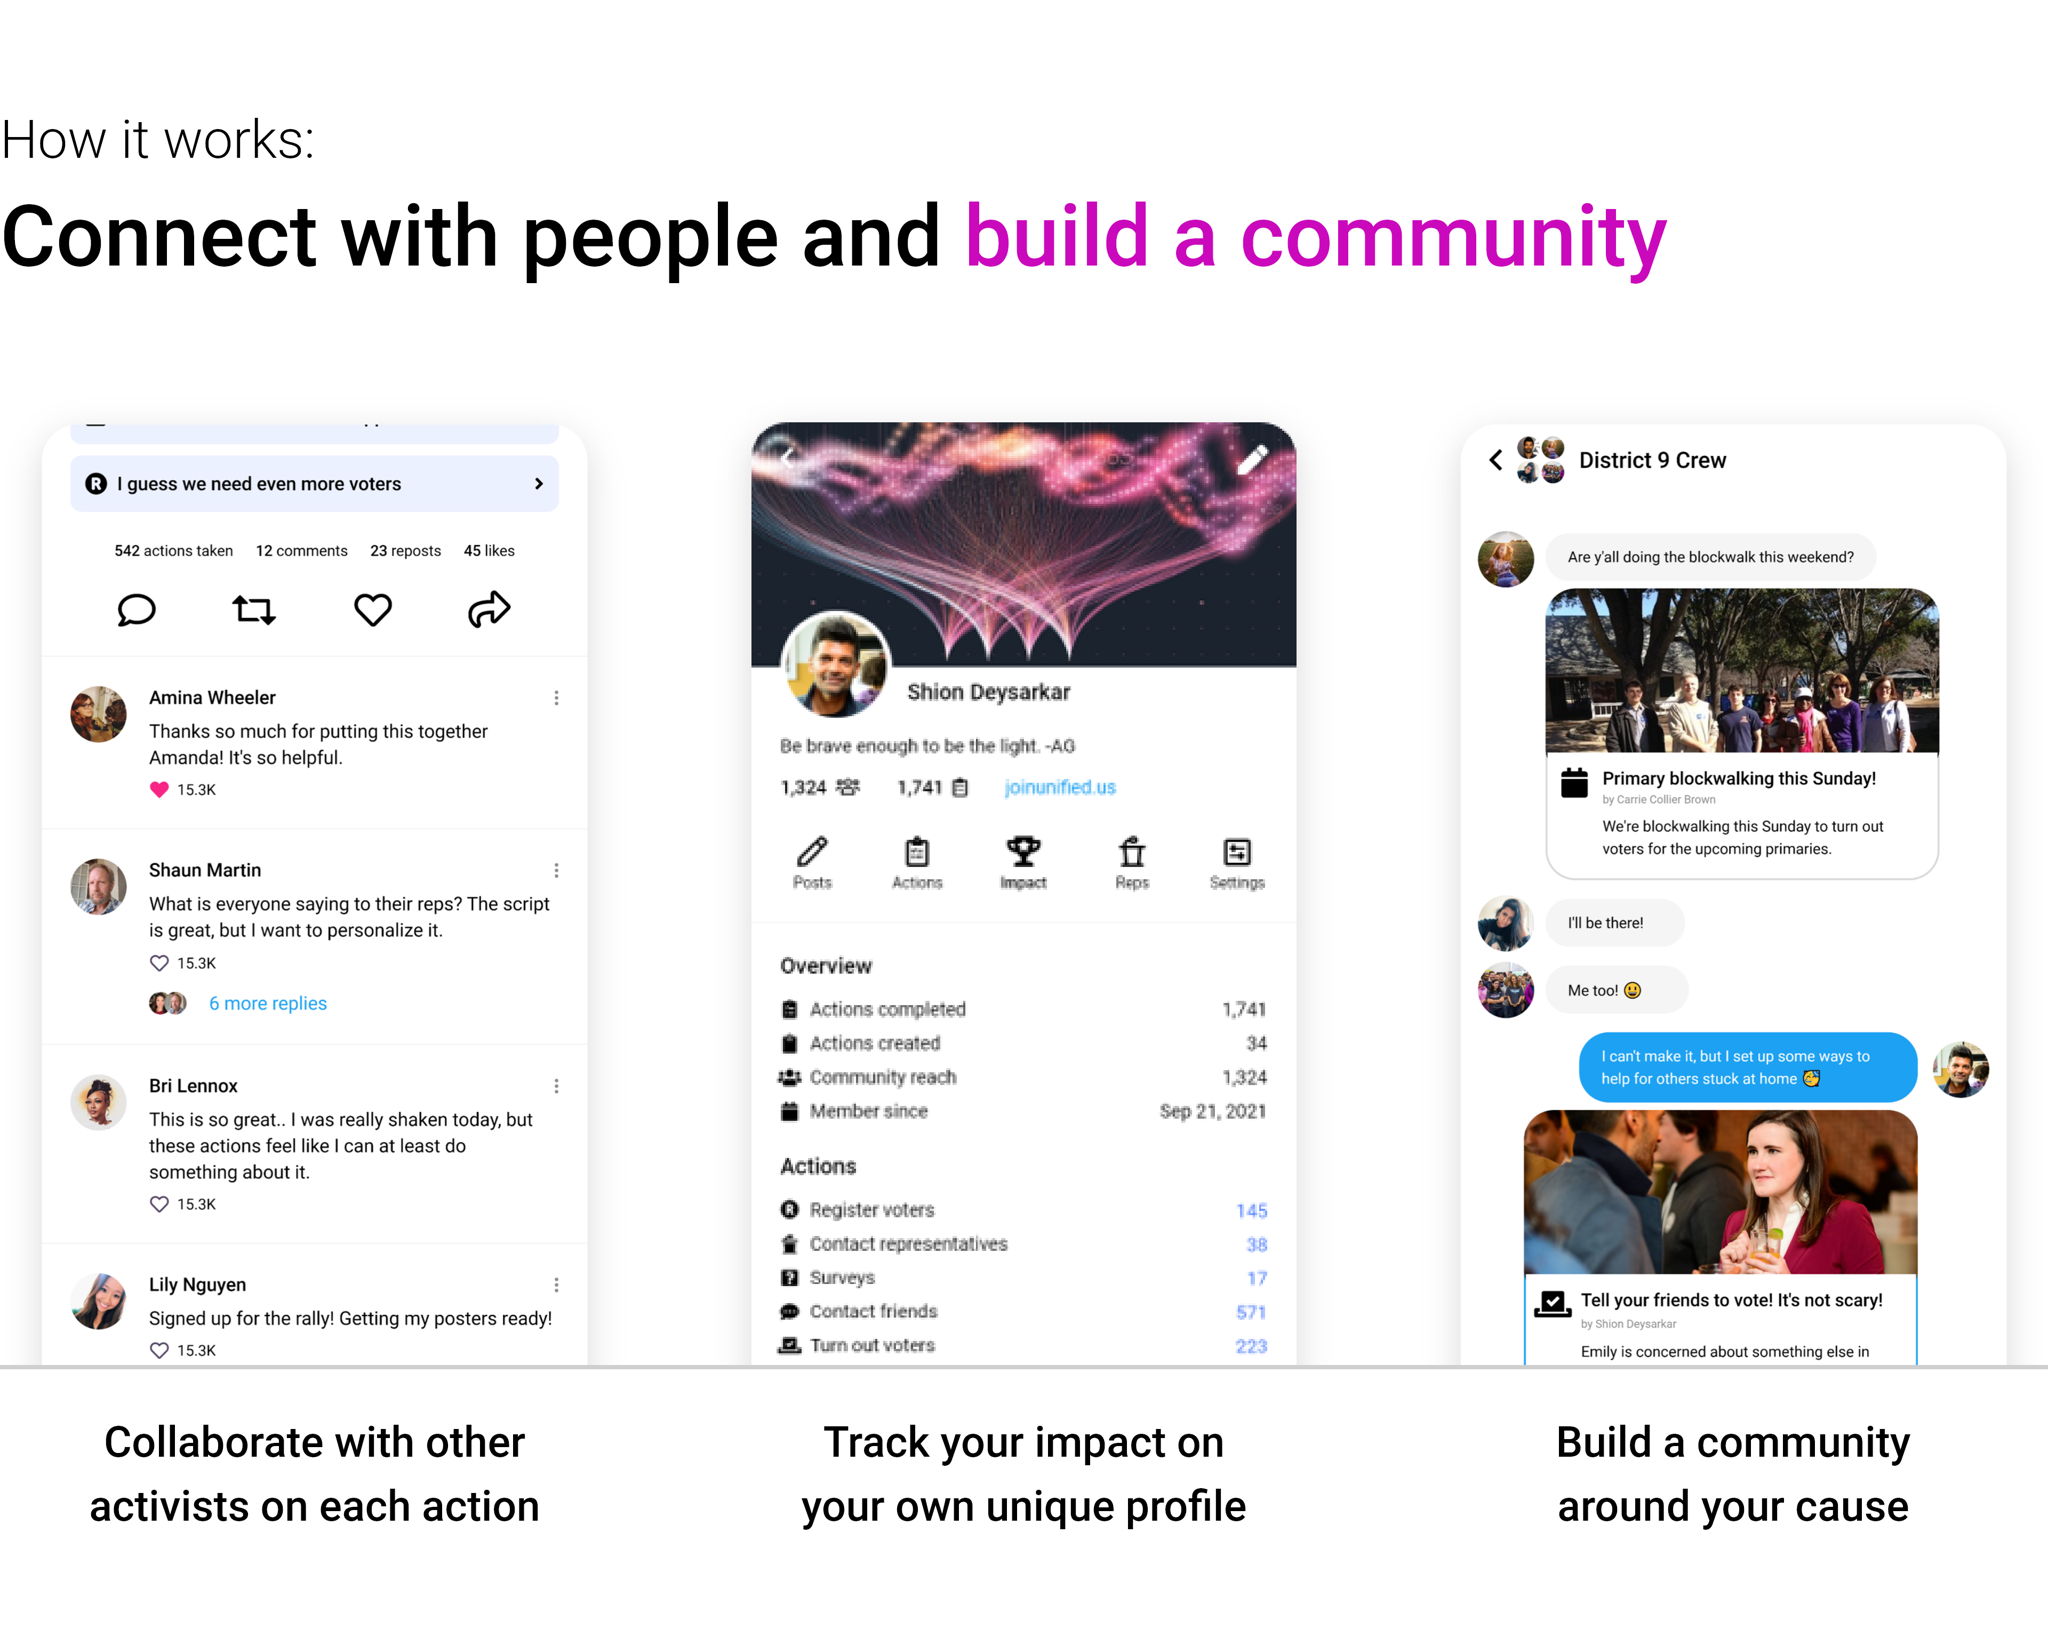 How it works: Connect with people and build a community.  Collaborate with other activists on each action.  Track your impact on your own unique profile.  Build a community around your cause.